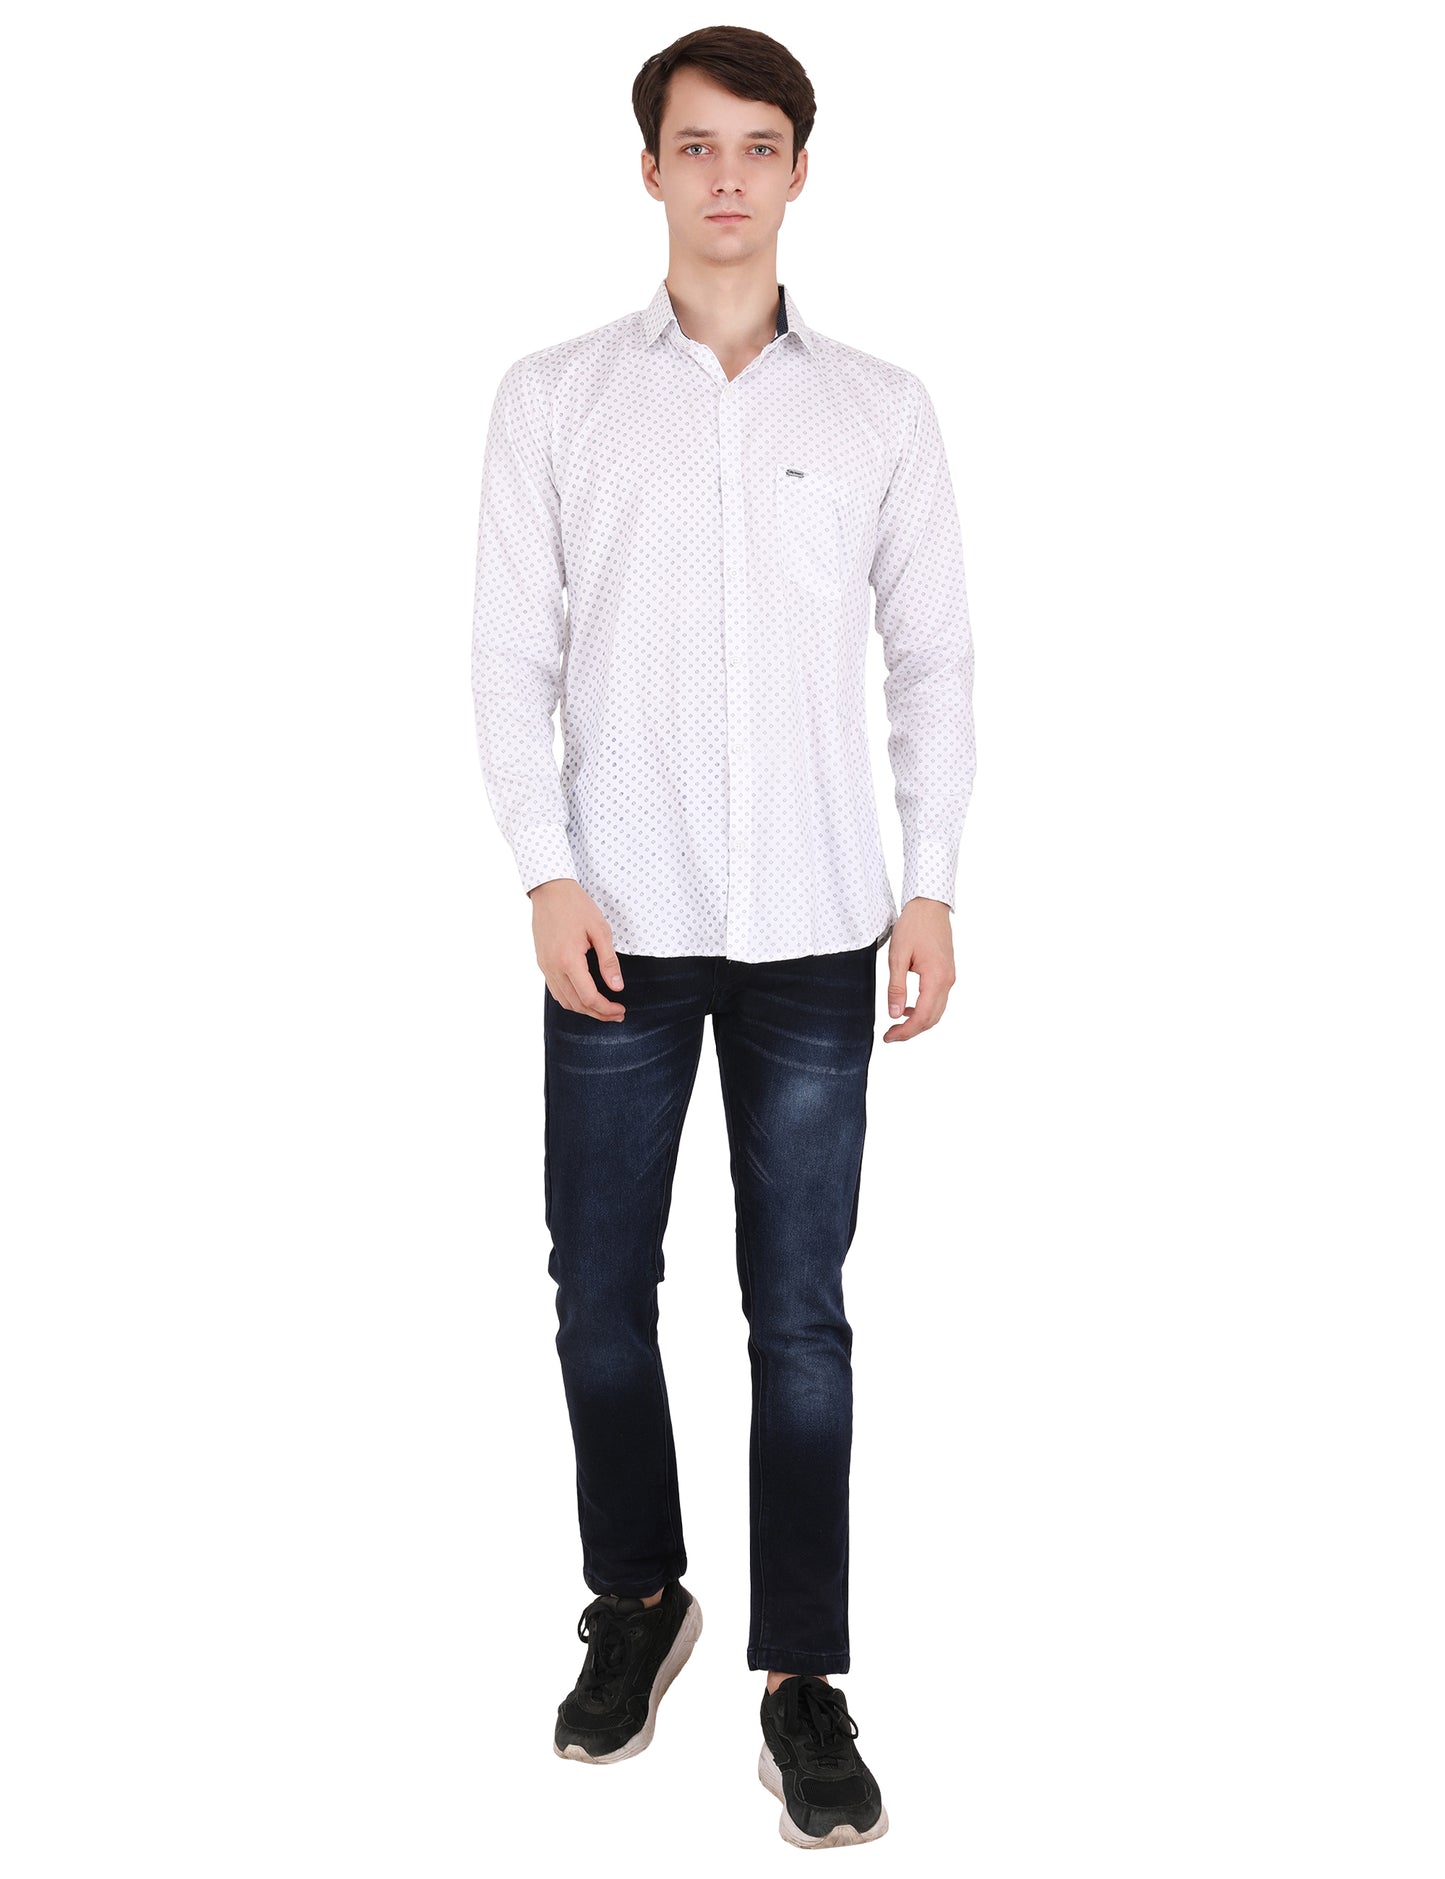 Classic Vibes: Printed White Shirt with Polka Pattern | Men's Fashion